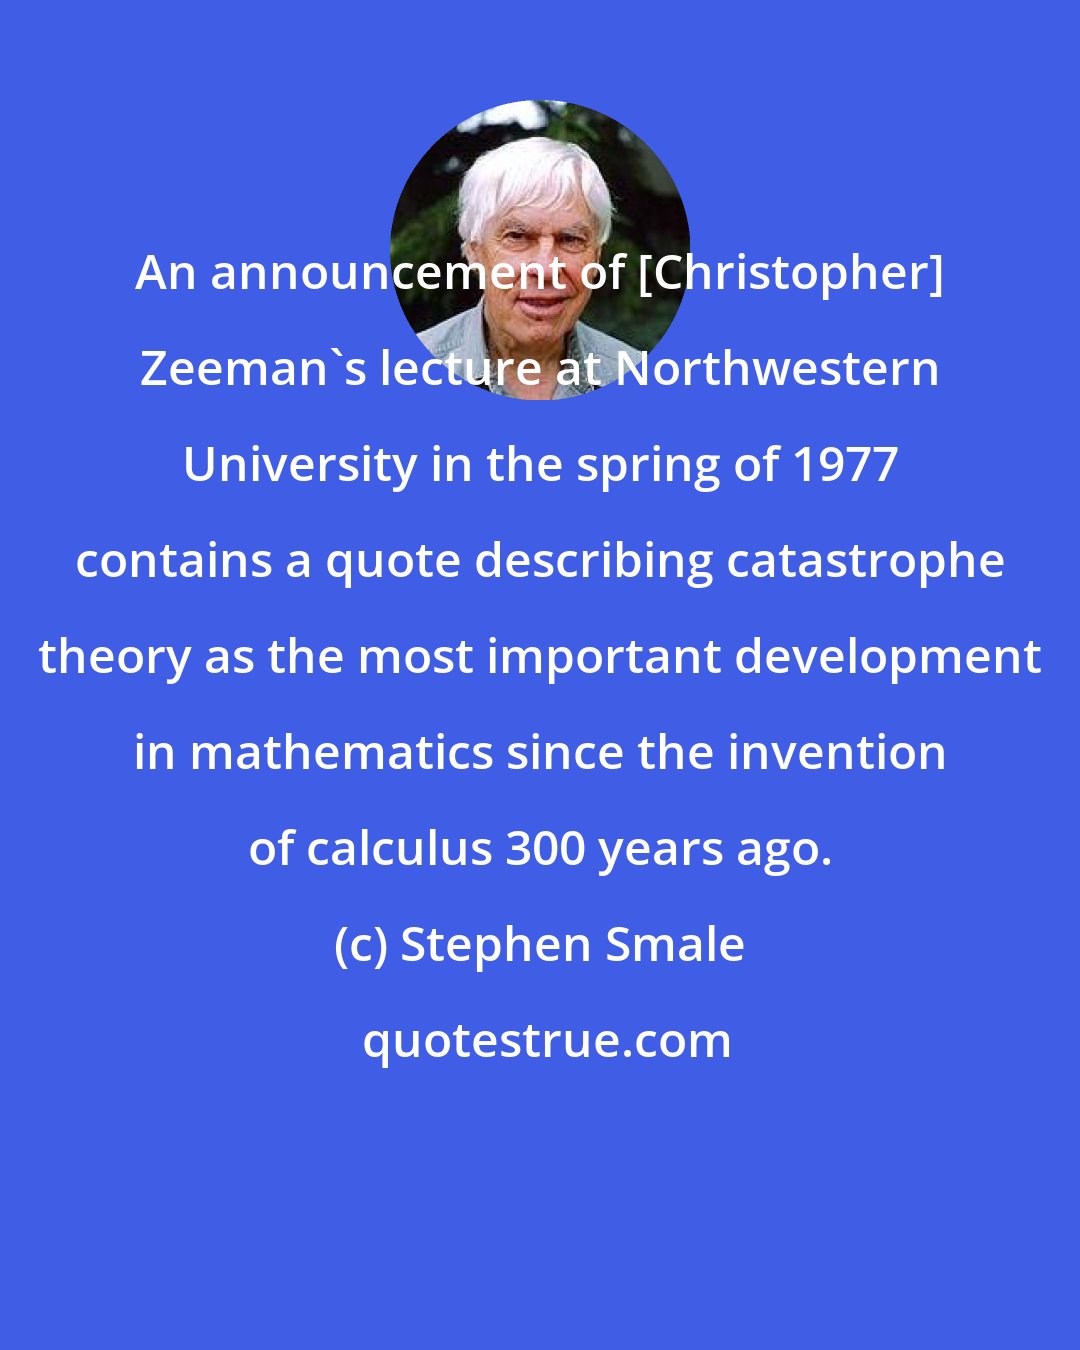 Stephen Smale: An announcement of [Christopher] Zeeman's lecture at Northwestern University in the spring of 1977 contains a quote describing catastrophe theory as the most important development in mathematics since the invention of calculus 300 years ago.